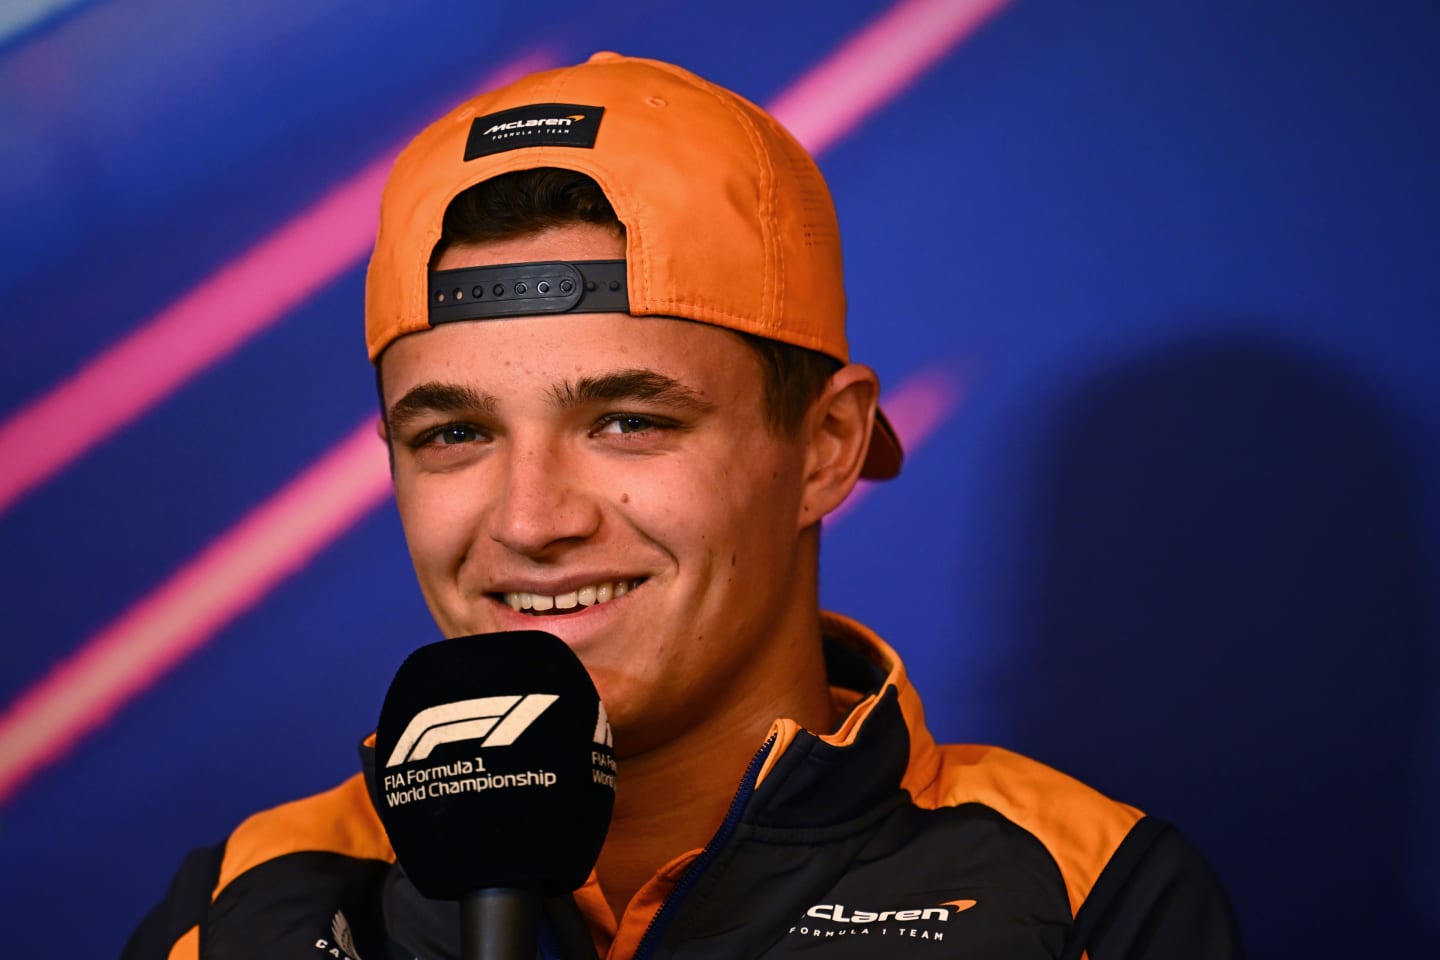 MONTREAL, QUEBEC - JUNE 17: Lando Norris of Great Britain and McLaren talks in the Drivers Press Conference prior to practice ahead of the F1 Grand Prix of Canada at Circuit Gilles Villeneuve on June 17, 2022 in Montreal, Quebec. (Photo by Clive Mason/Getty Images)